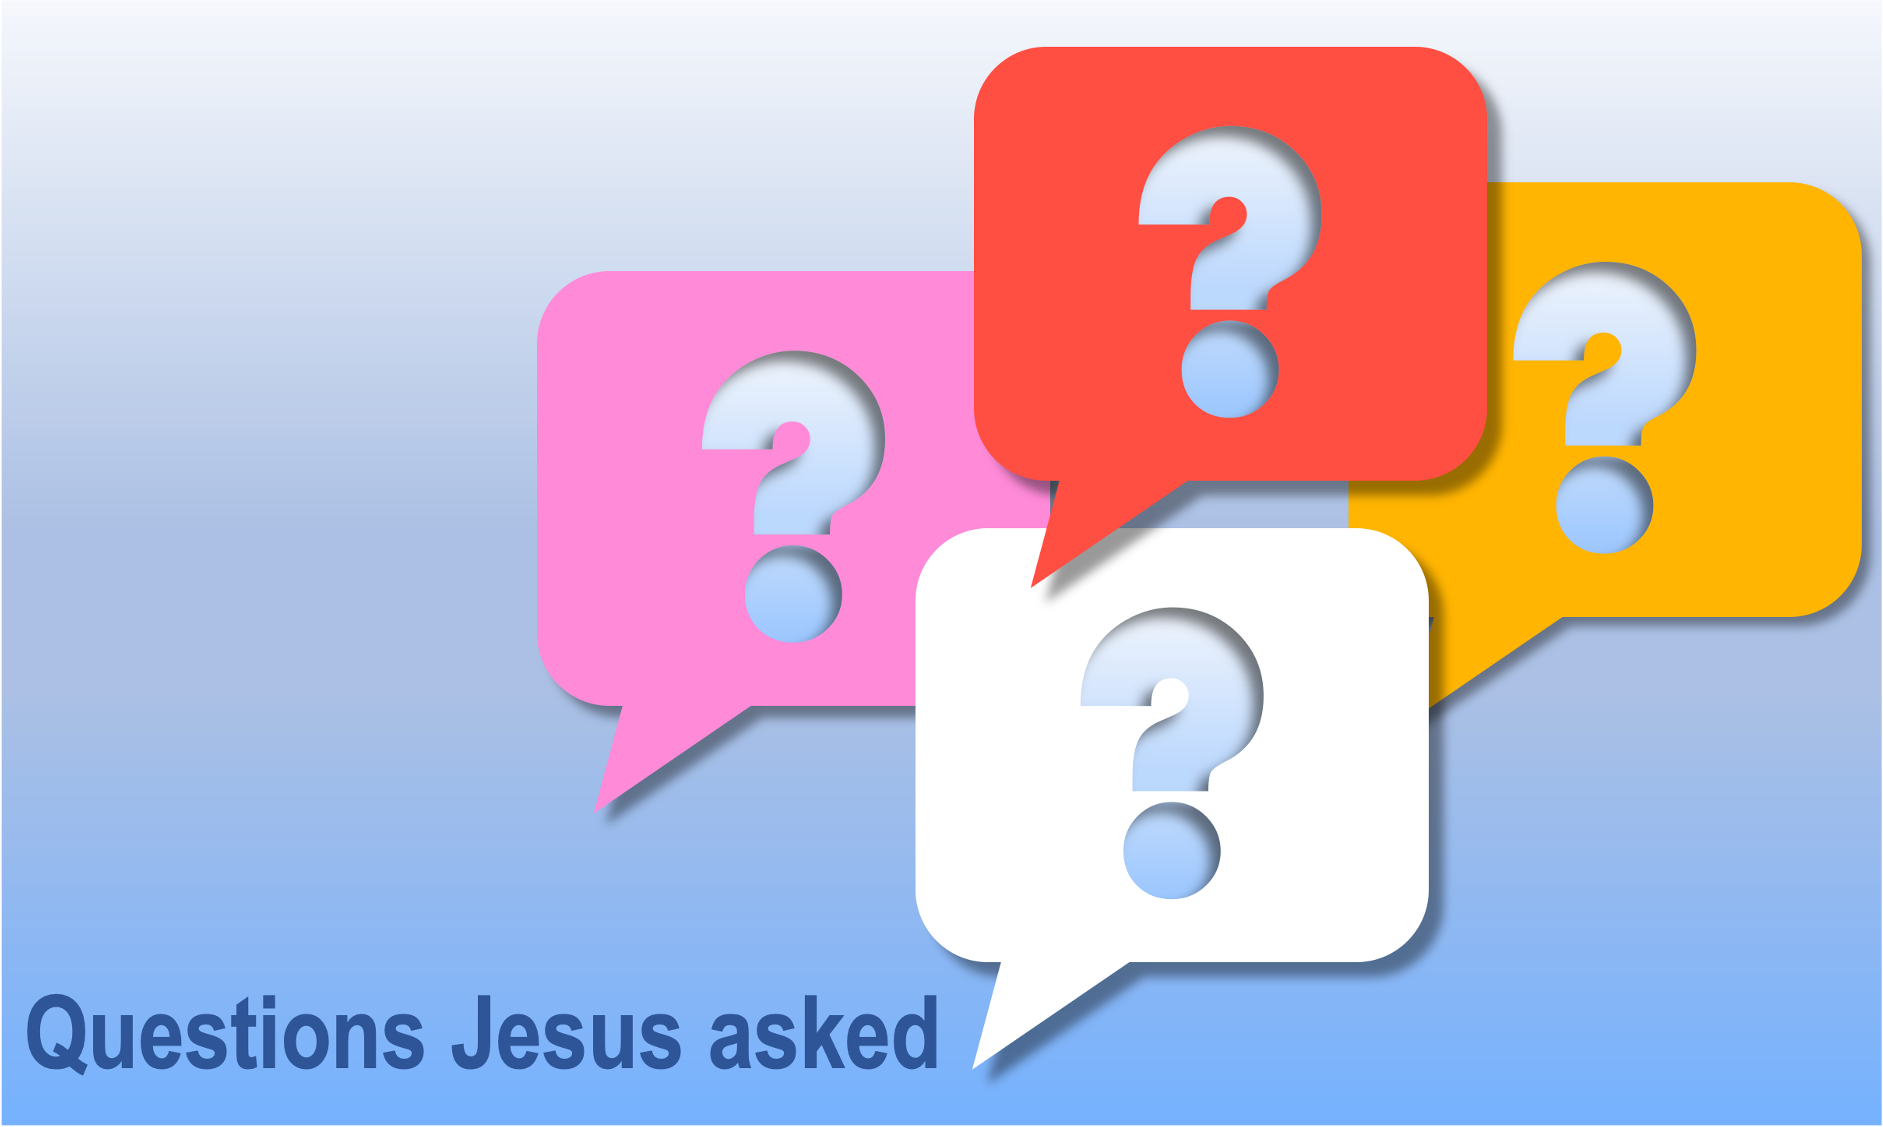 Questions Jesus asked